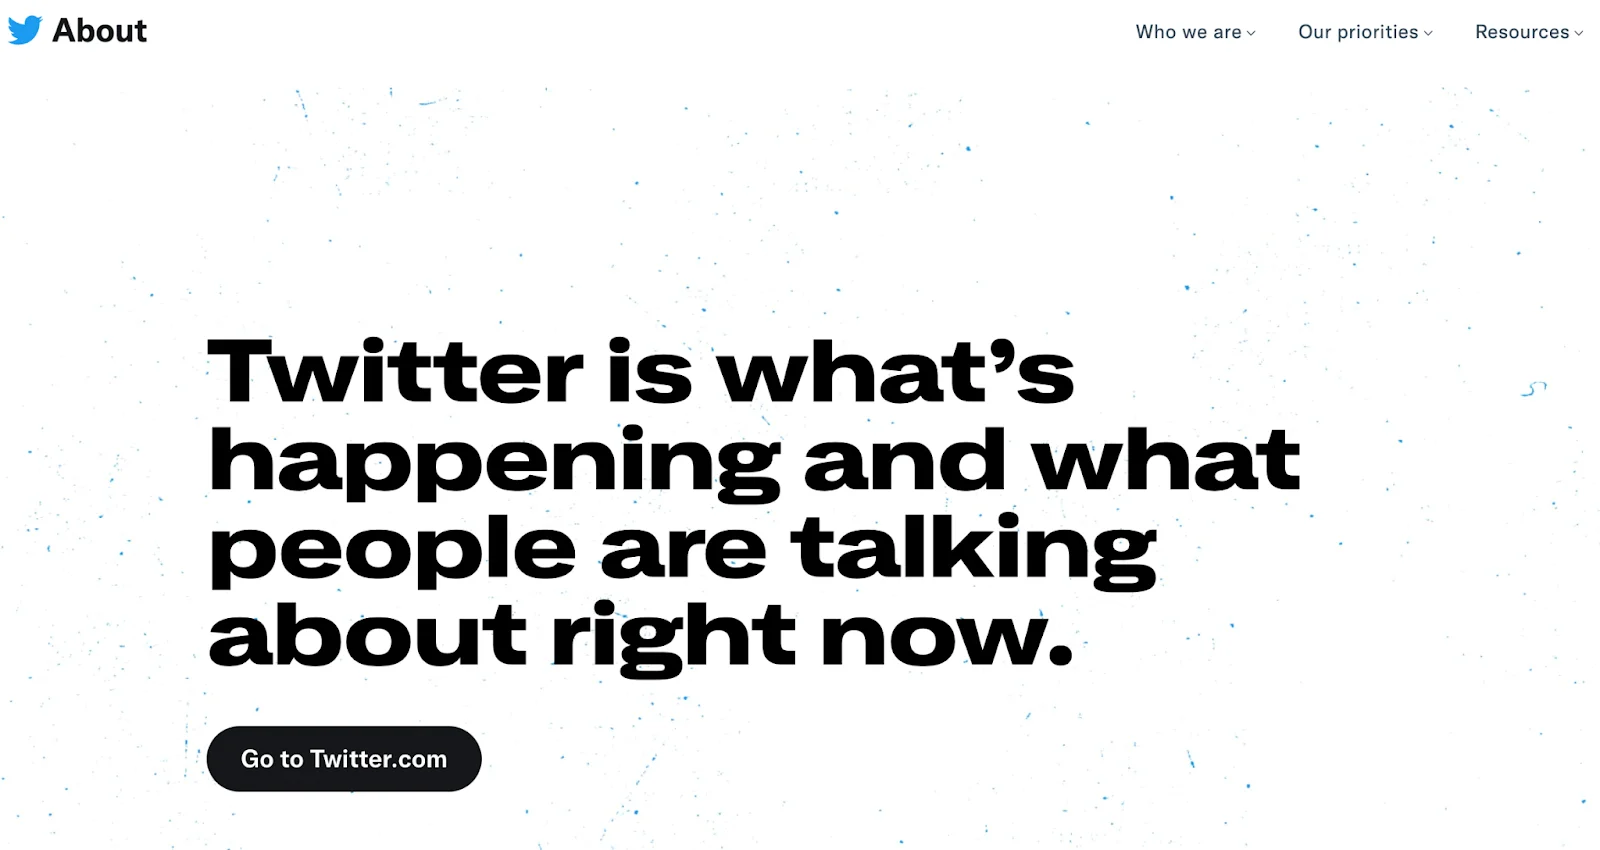 Screenshot from Twitter saying Twitter is what’s happening now